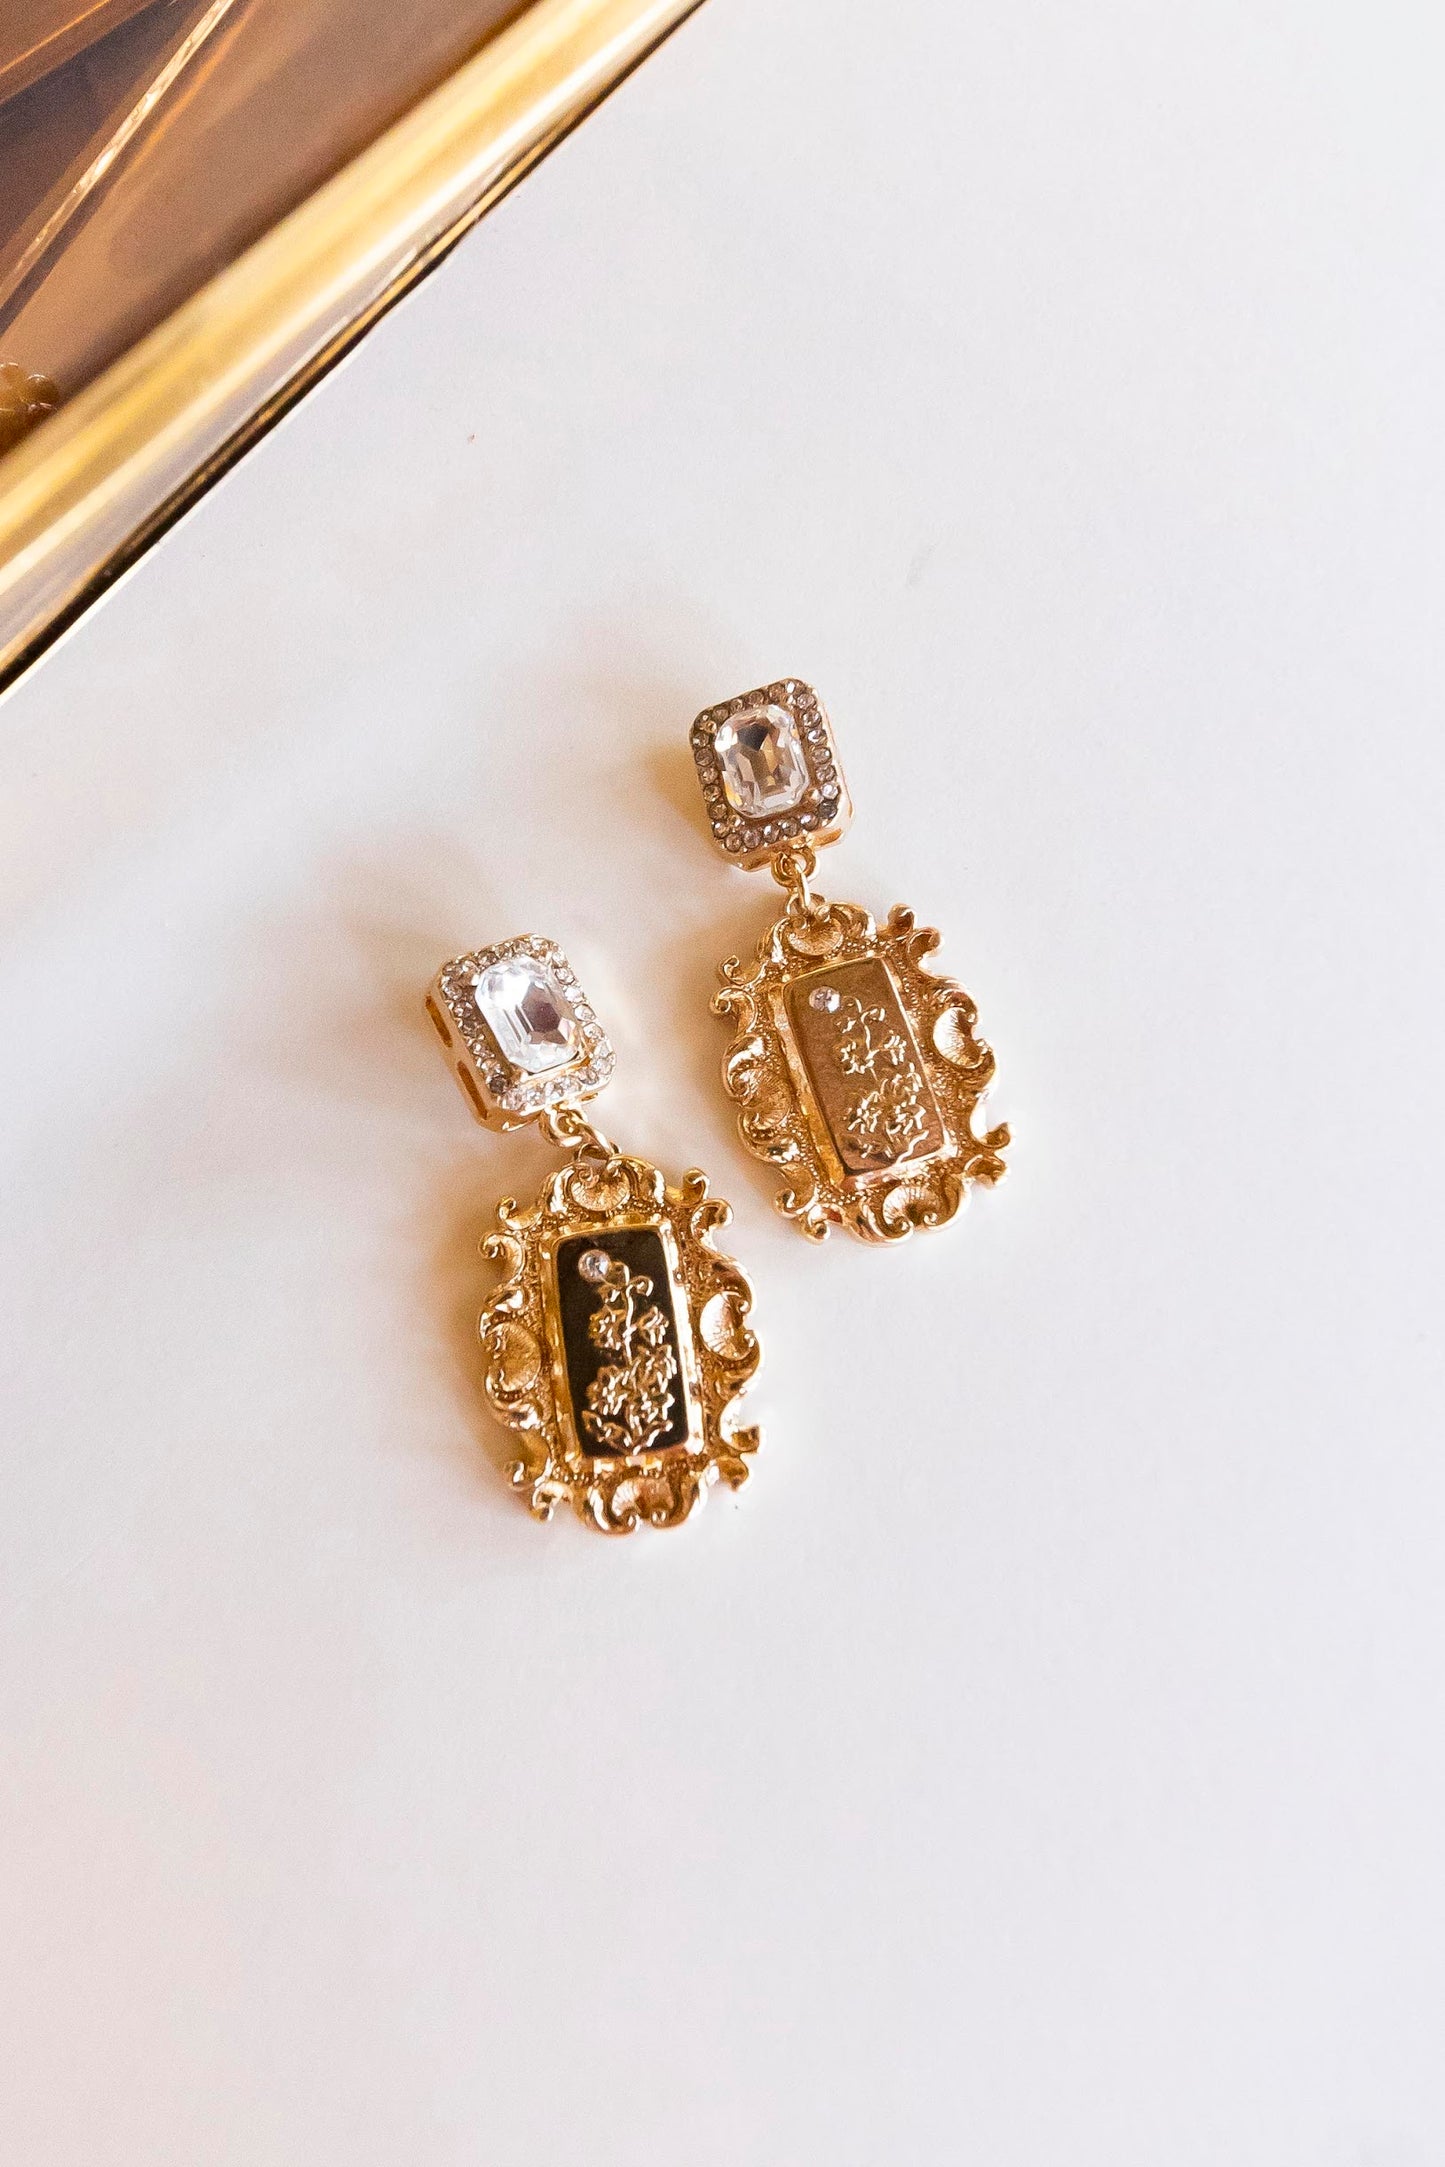 Victoria Ornate Gold Drop Earrings | Royal Ornate Gold Embossed with Clear Crystal Detail | Everyday and Special Occasion Earrings